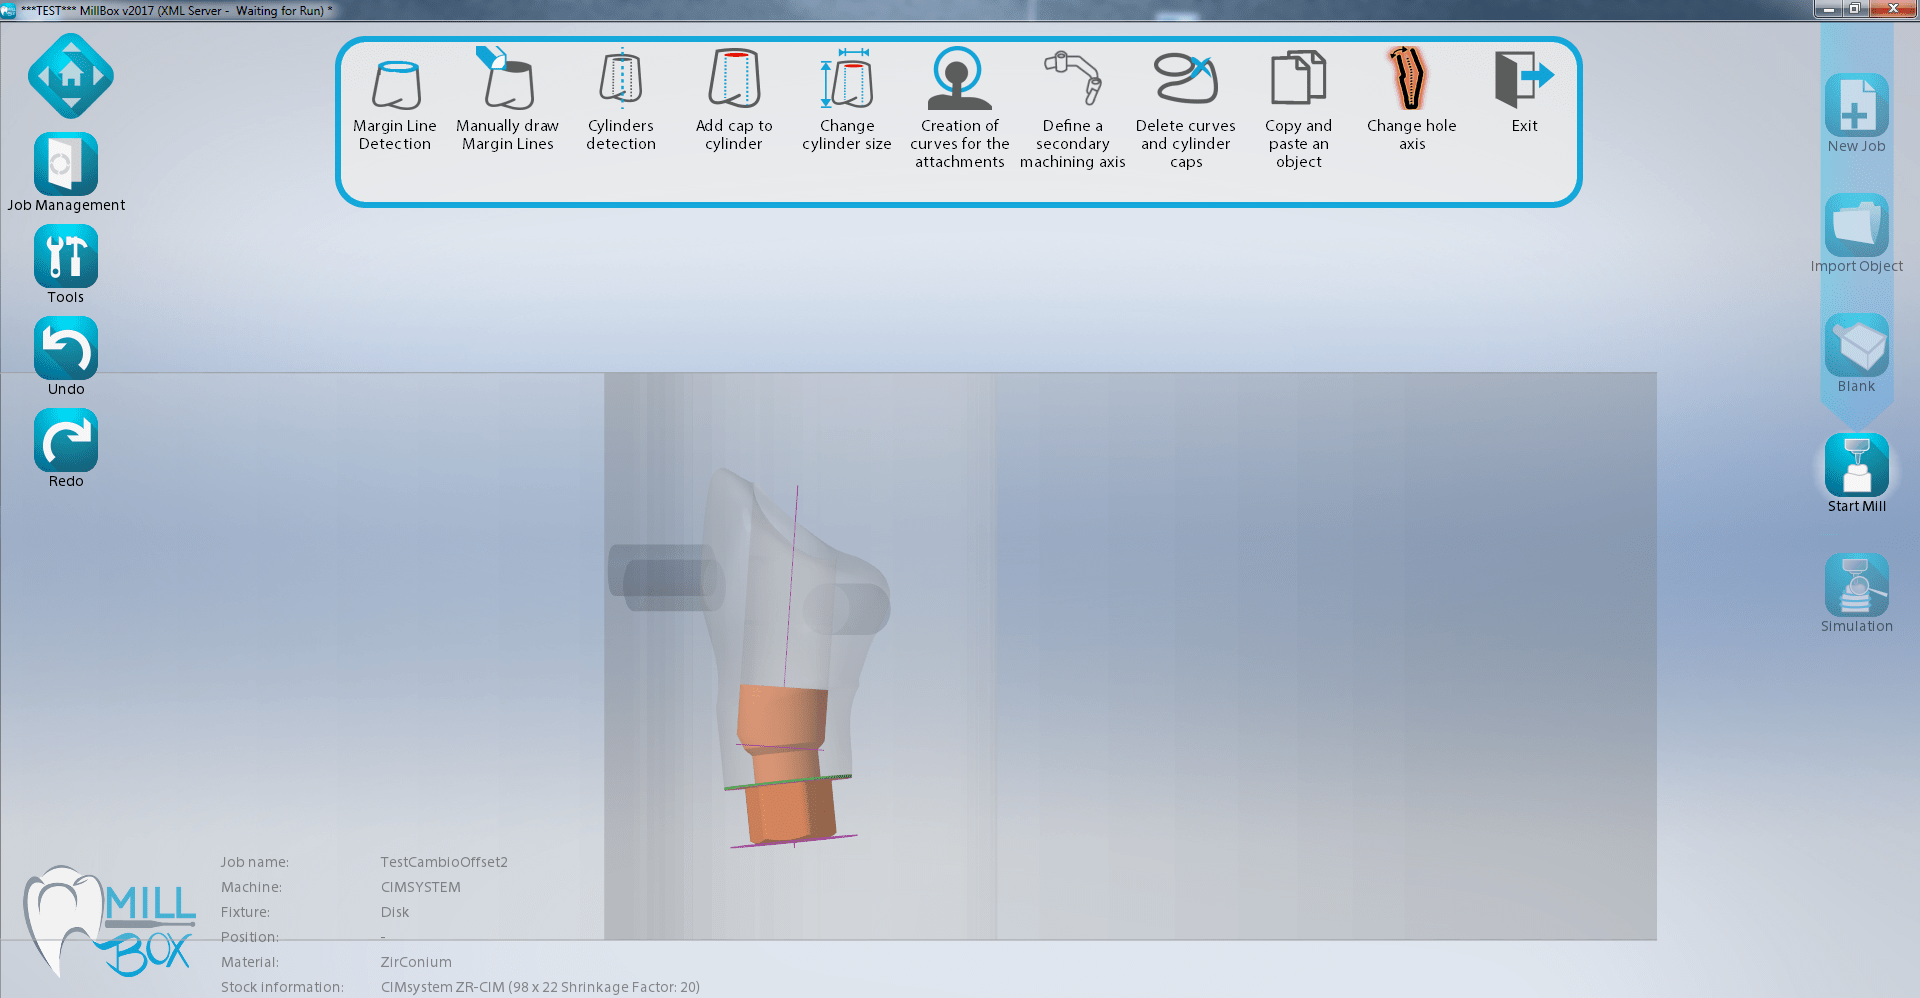 Image shows print screen of change hole axis in Millbox dental software